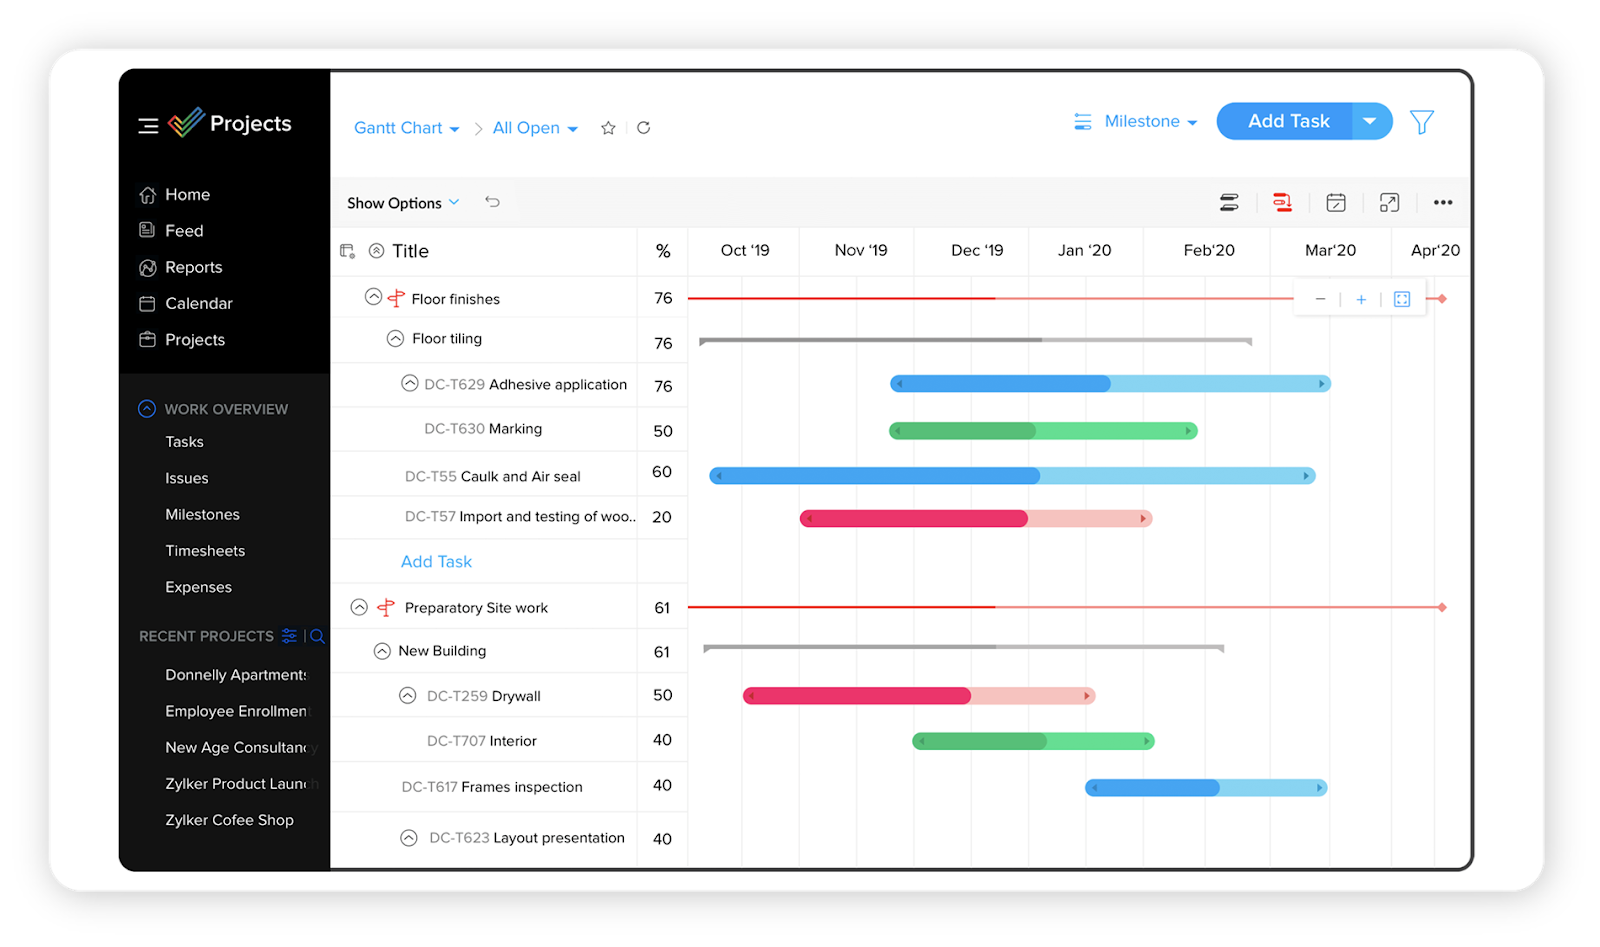 Zoho projects interface with gantt chart for the construction project